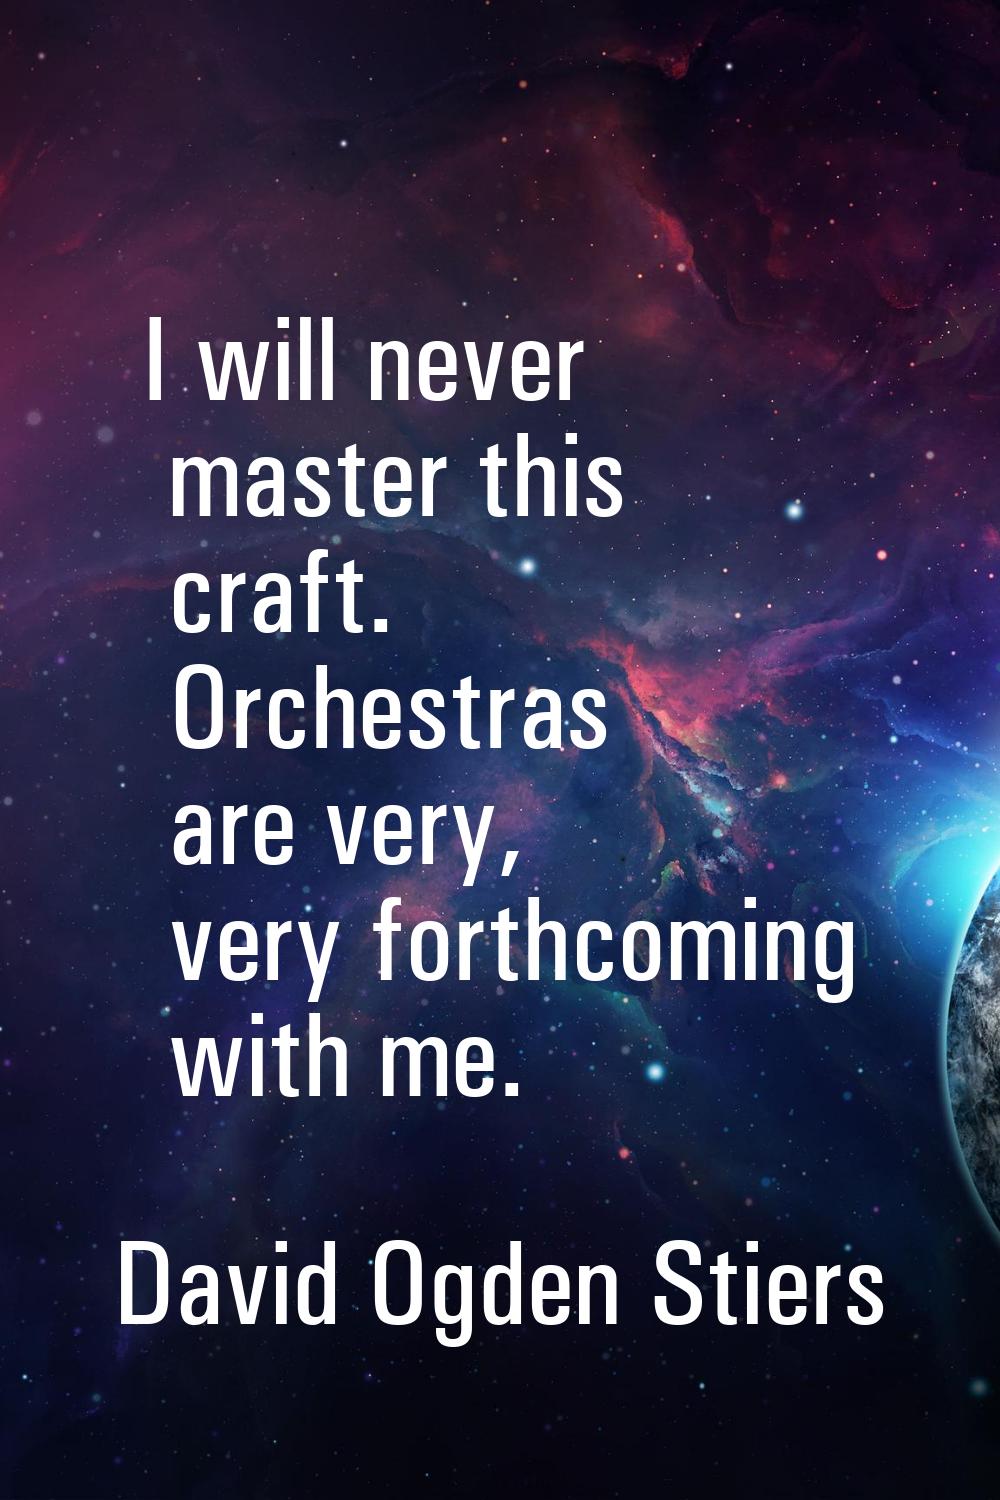 I will never master this craft. Orchestras are very, very forthcoming with me.